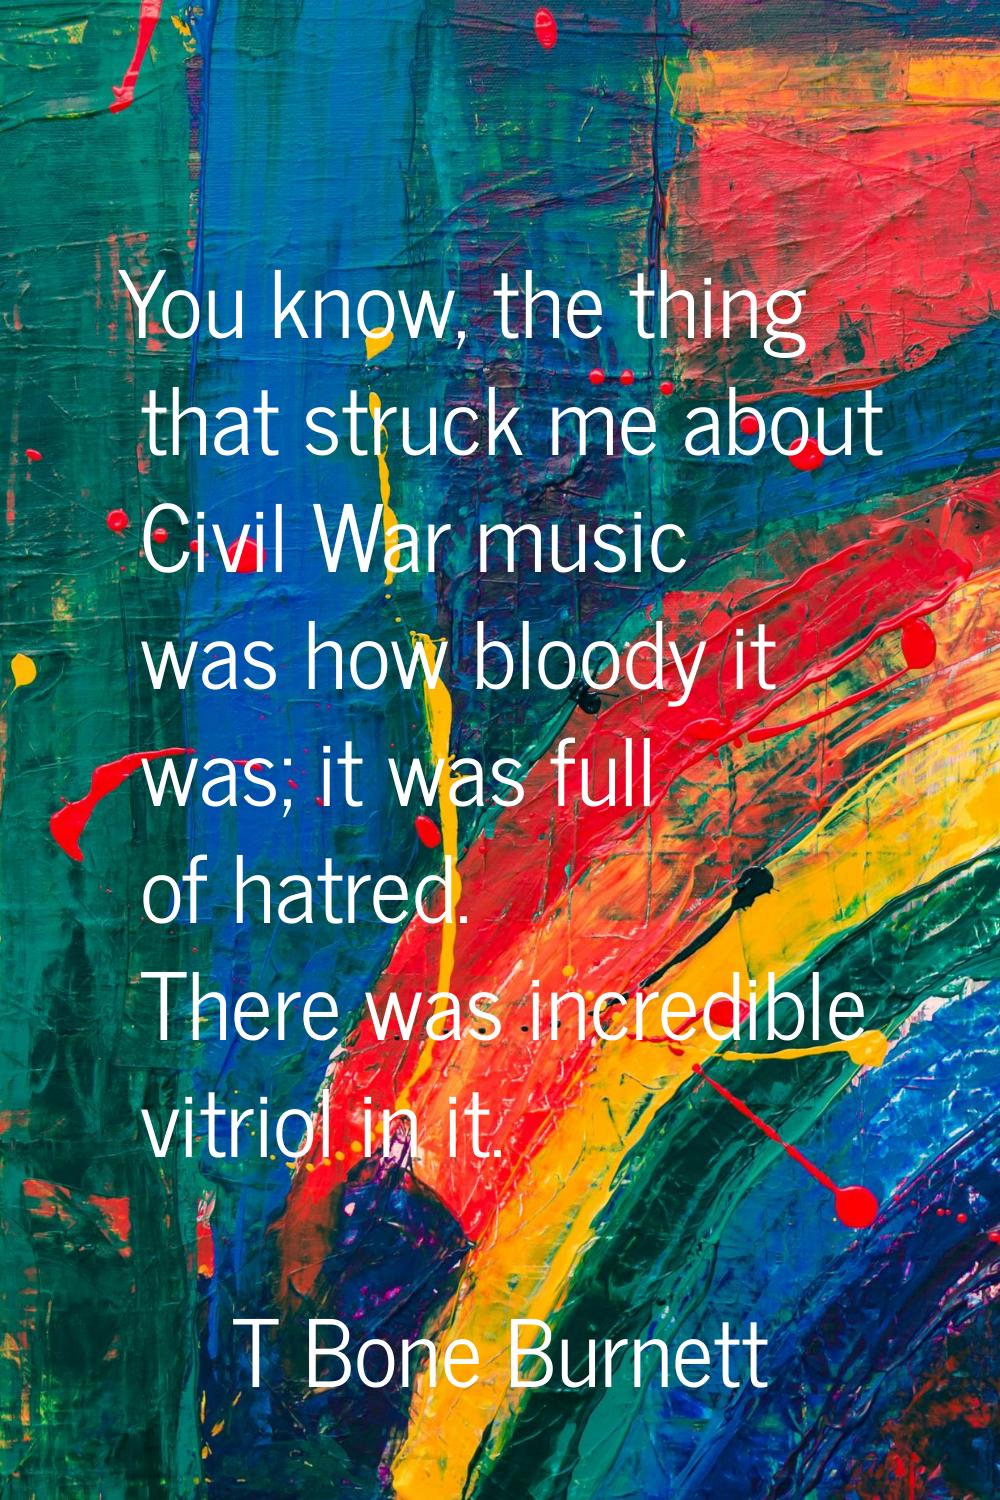 You know, the thing that struck me about Civil War music was how bloody it was; it was full of hatr